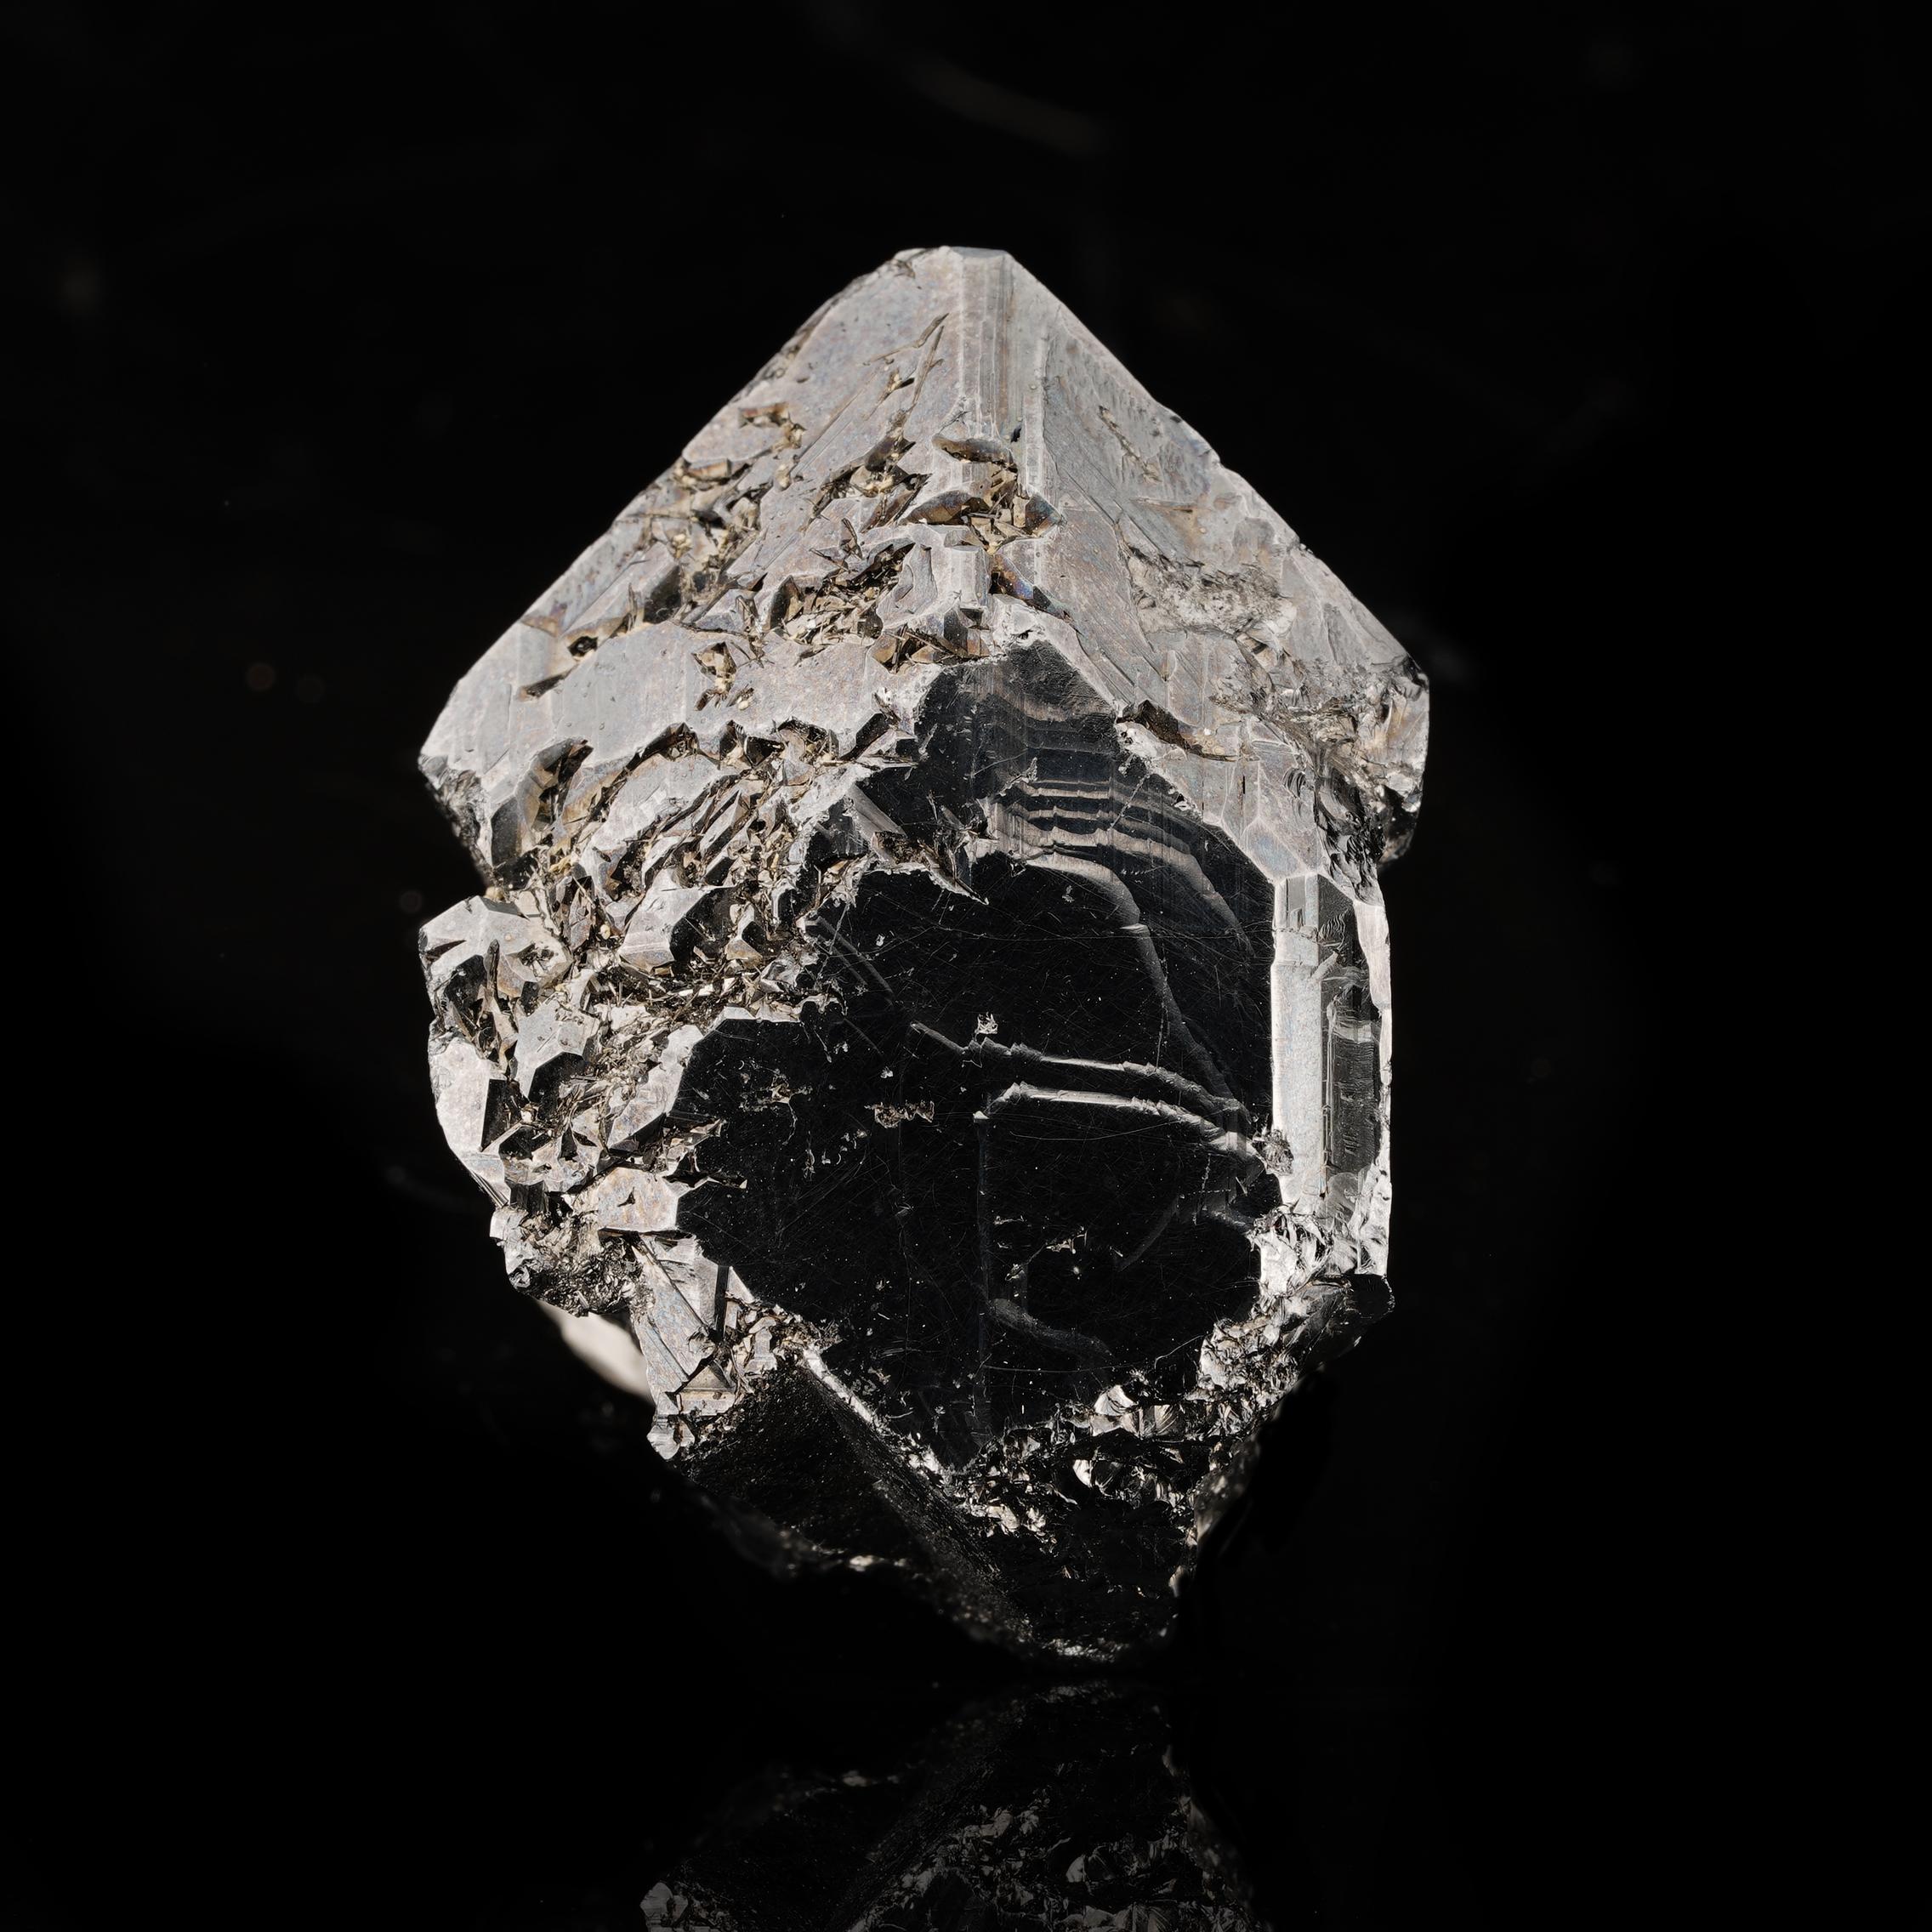 Hunan, China

This huge twinning crystal is a beautiful example of a new find of bournonite that has been coming out of China for the past few years. Always a sought after rarity in the market, this specimen from the Yaogangxian Mine priced to sell